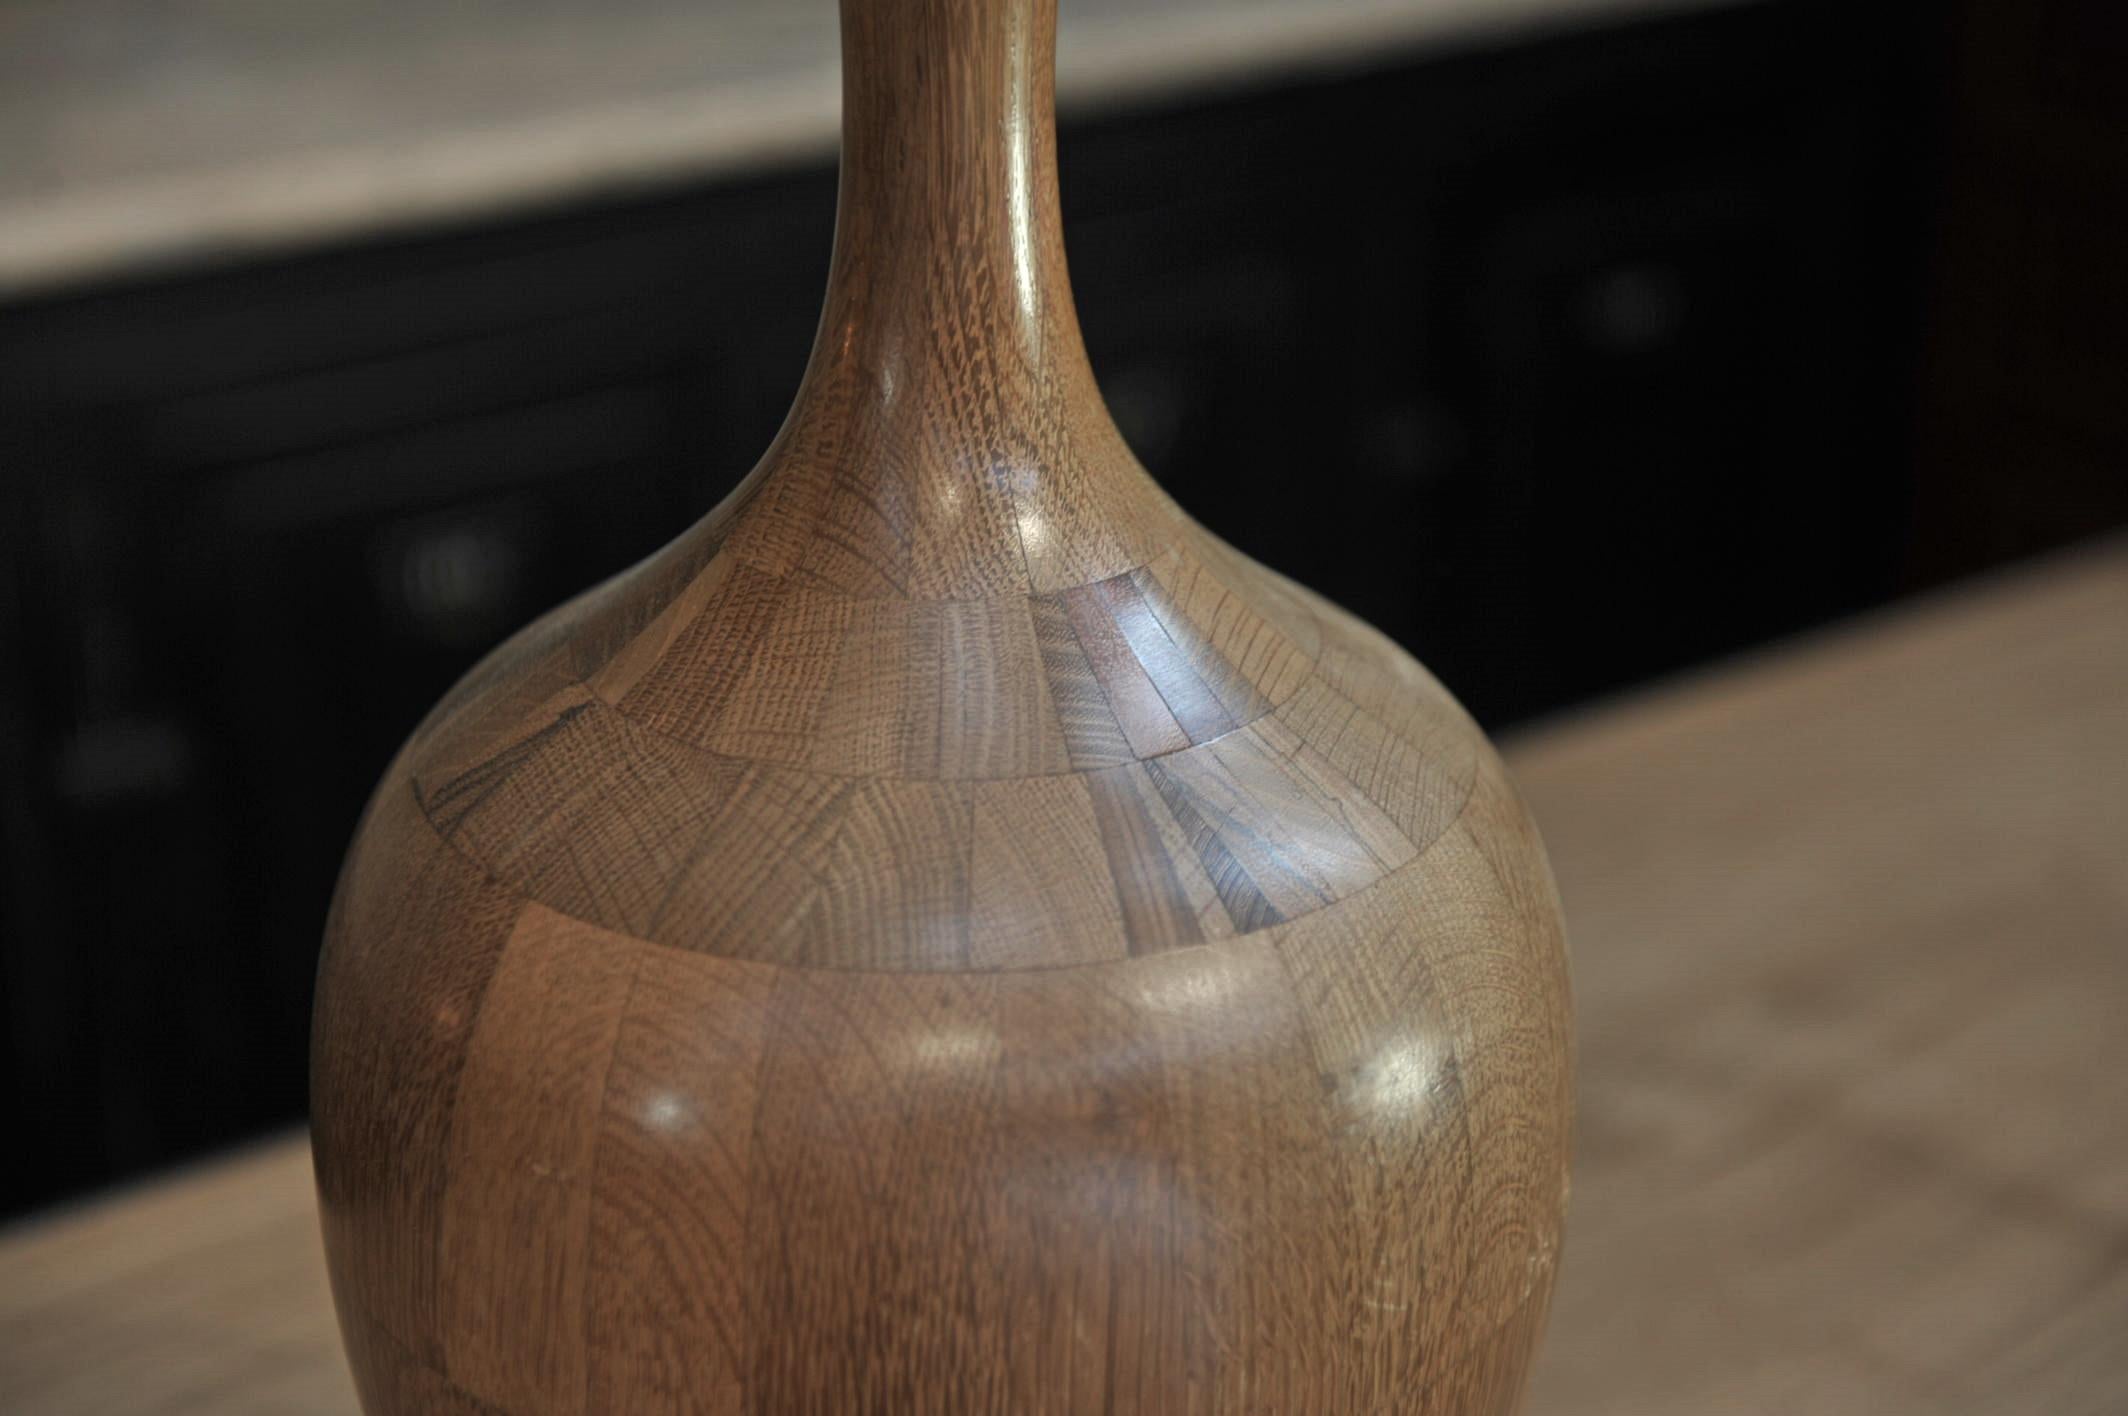 Set of Height Timber Vases, De Coene Frères, 1930s For Sale 6